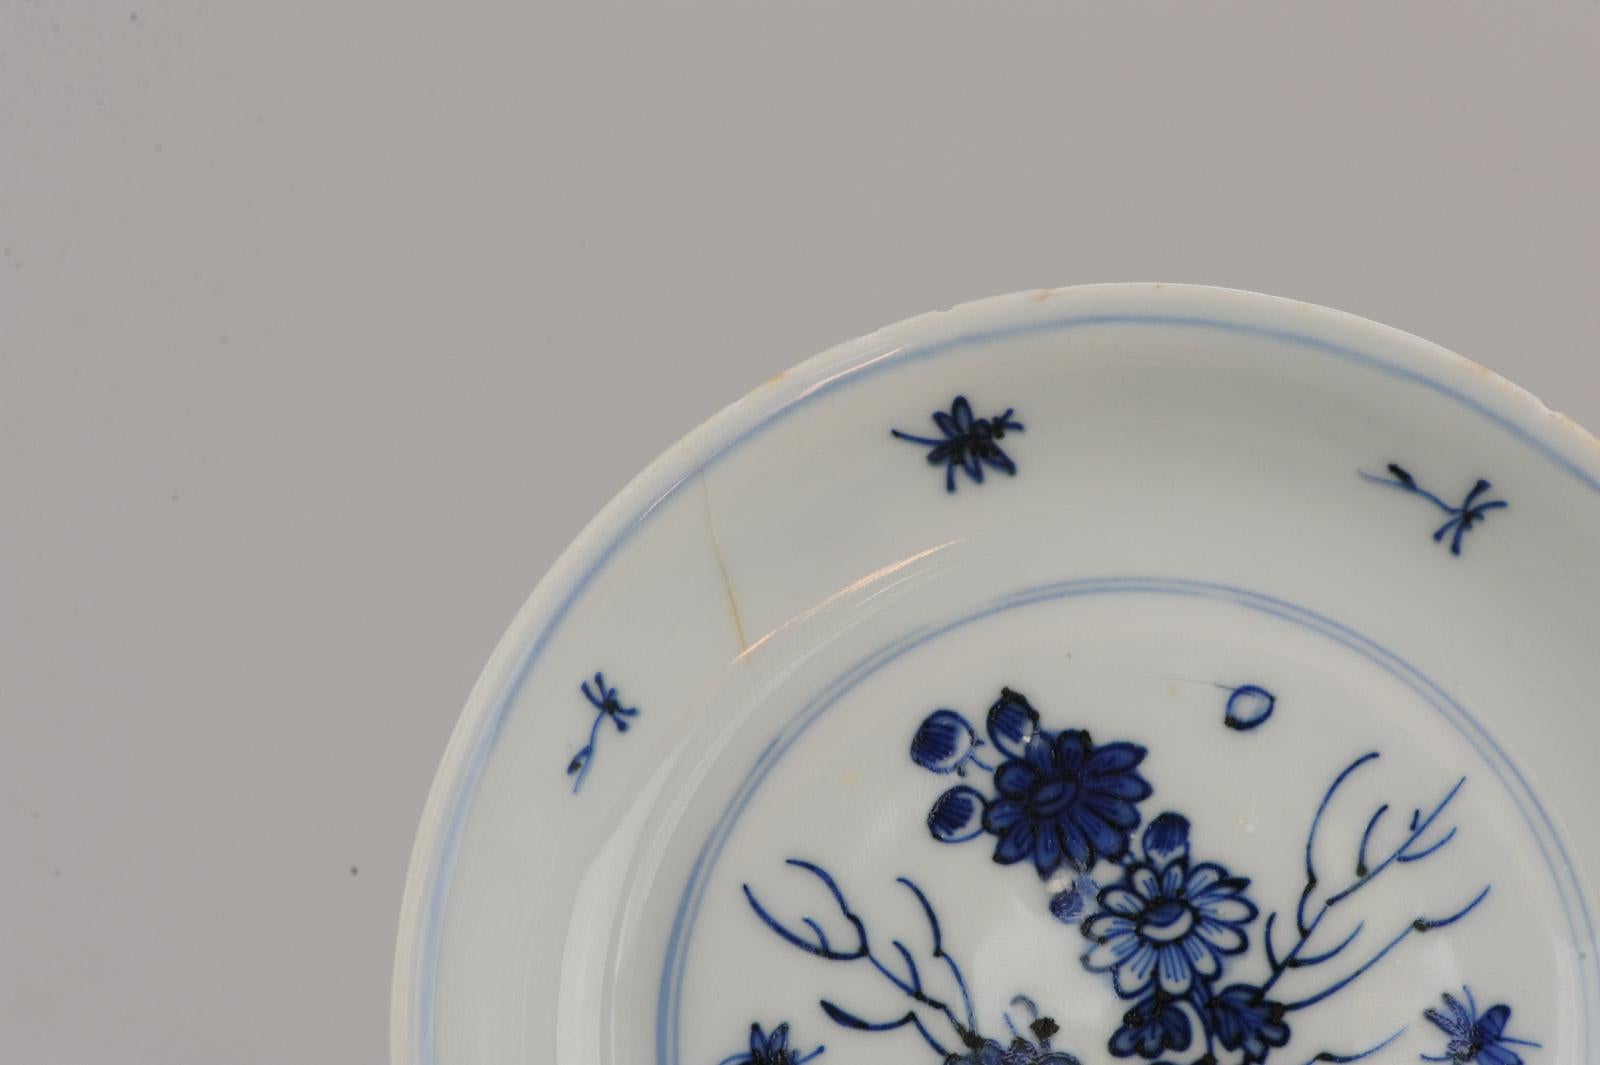 Antique Chinese Porcelain Plate 17th Century Ming Dynasty Tianqi/Chongzhen 3